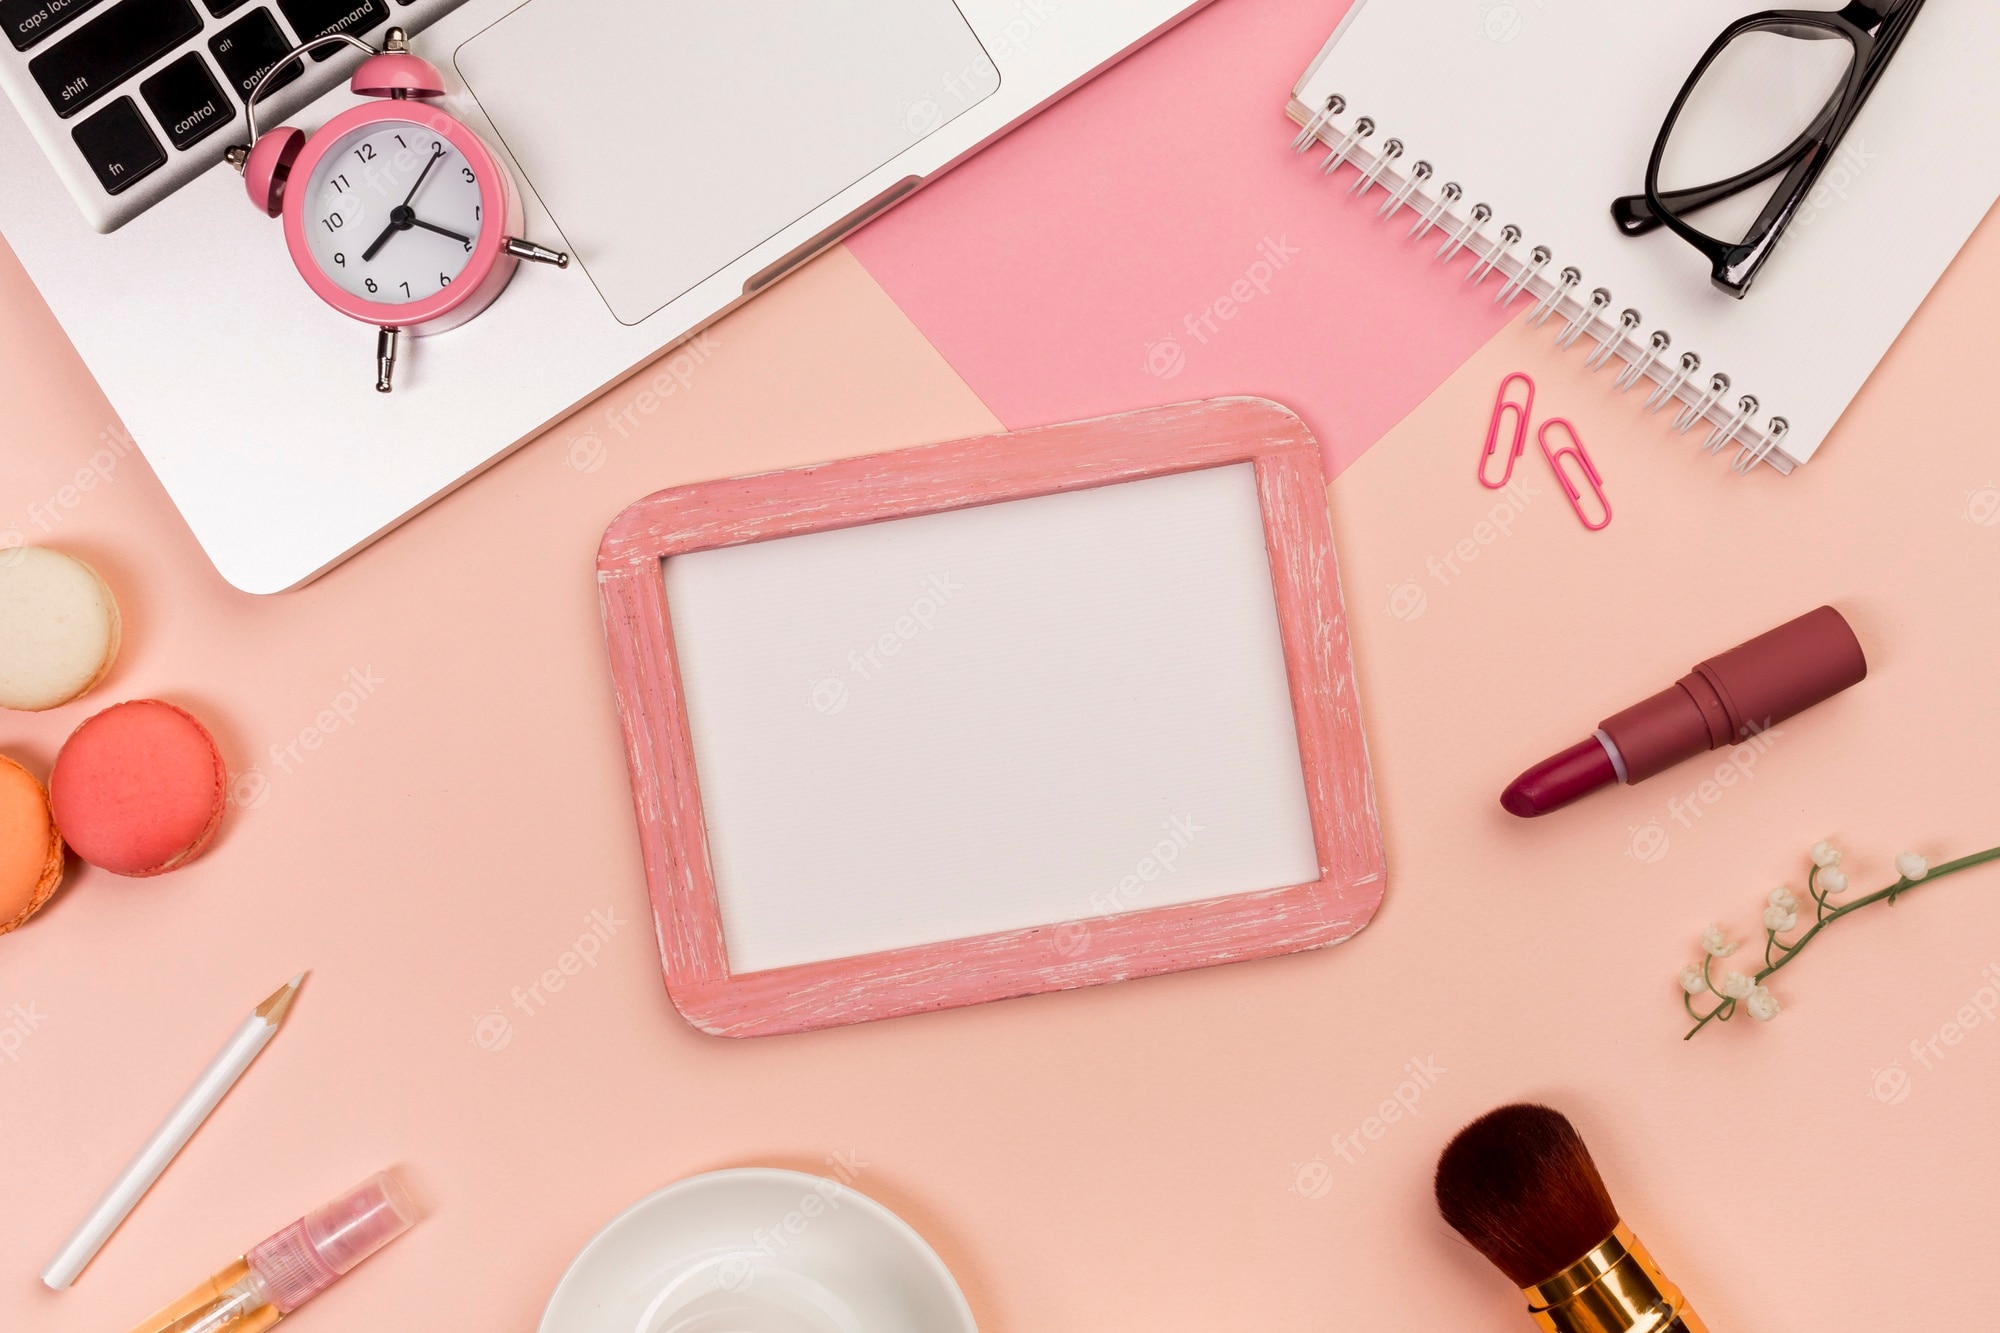 A laptop, makeup and other items are on top of pink background - Makeup